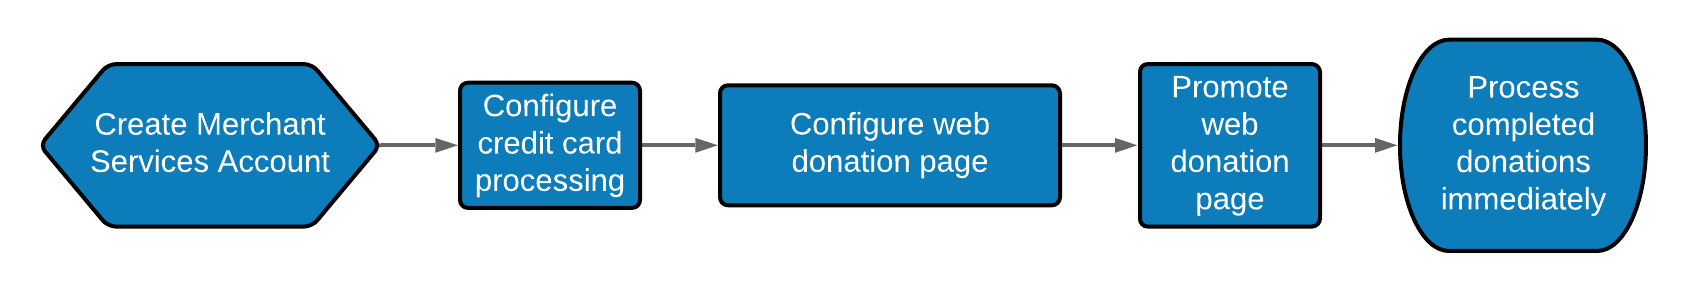 Web_Donation_Workflow.png